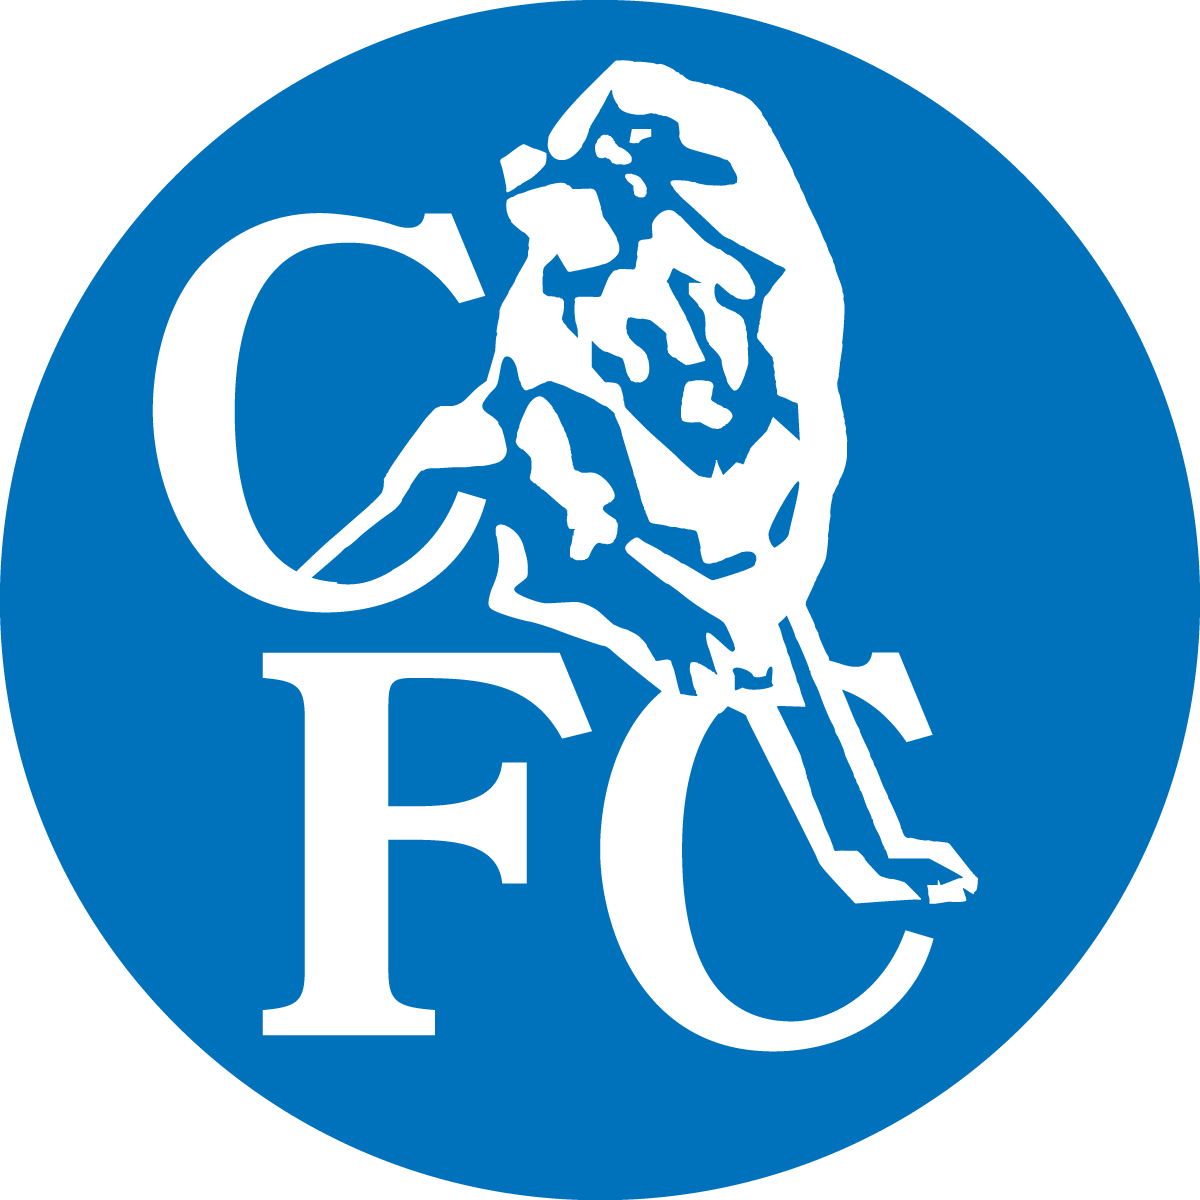 Image   Chelsea Fc Logo (White Lion, Blue Disc).png | Logopedia | Fandom Powered By Wikia - Chelsea, Transparent background PNG HD thumbnail